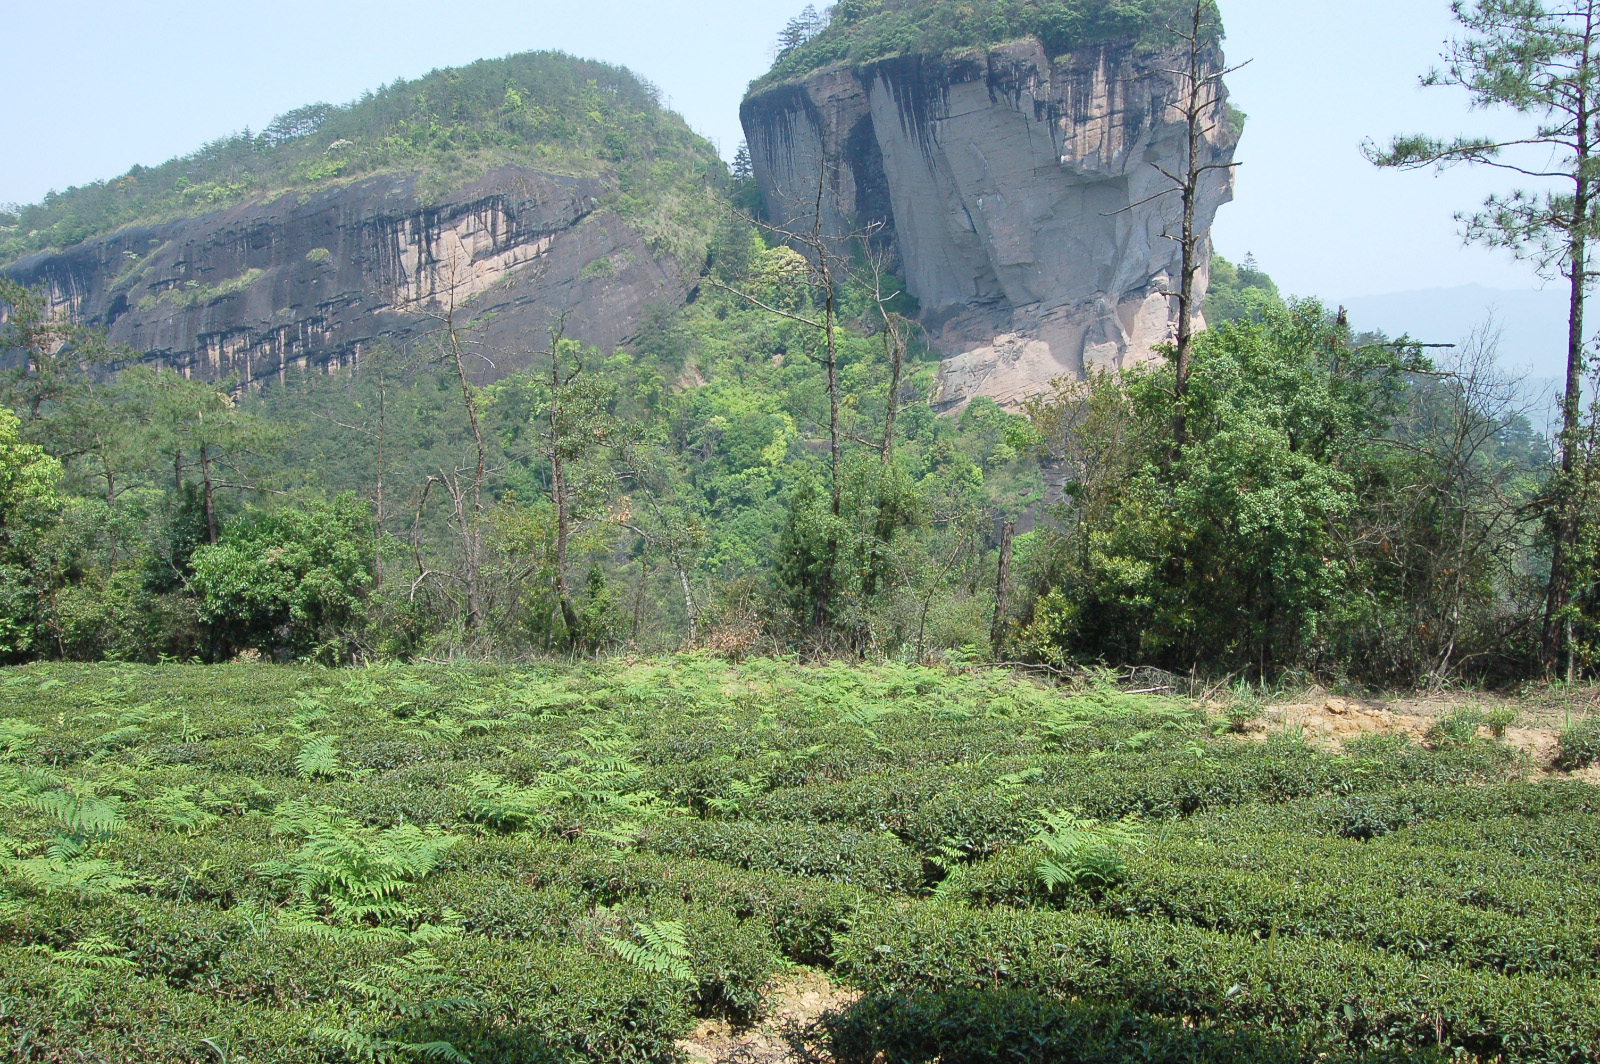 A patch of Shui Jin Gui (Golden Water Turtle) tea bushes with ferns growing between the rows. The bushes grow in a flat area while a bank of natural vegetation and then sheer stone cliffs rise in the background.